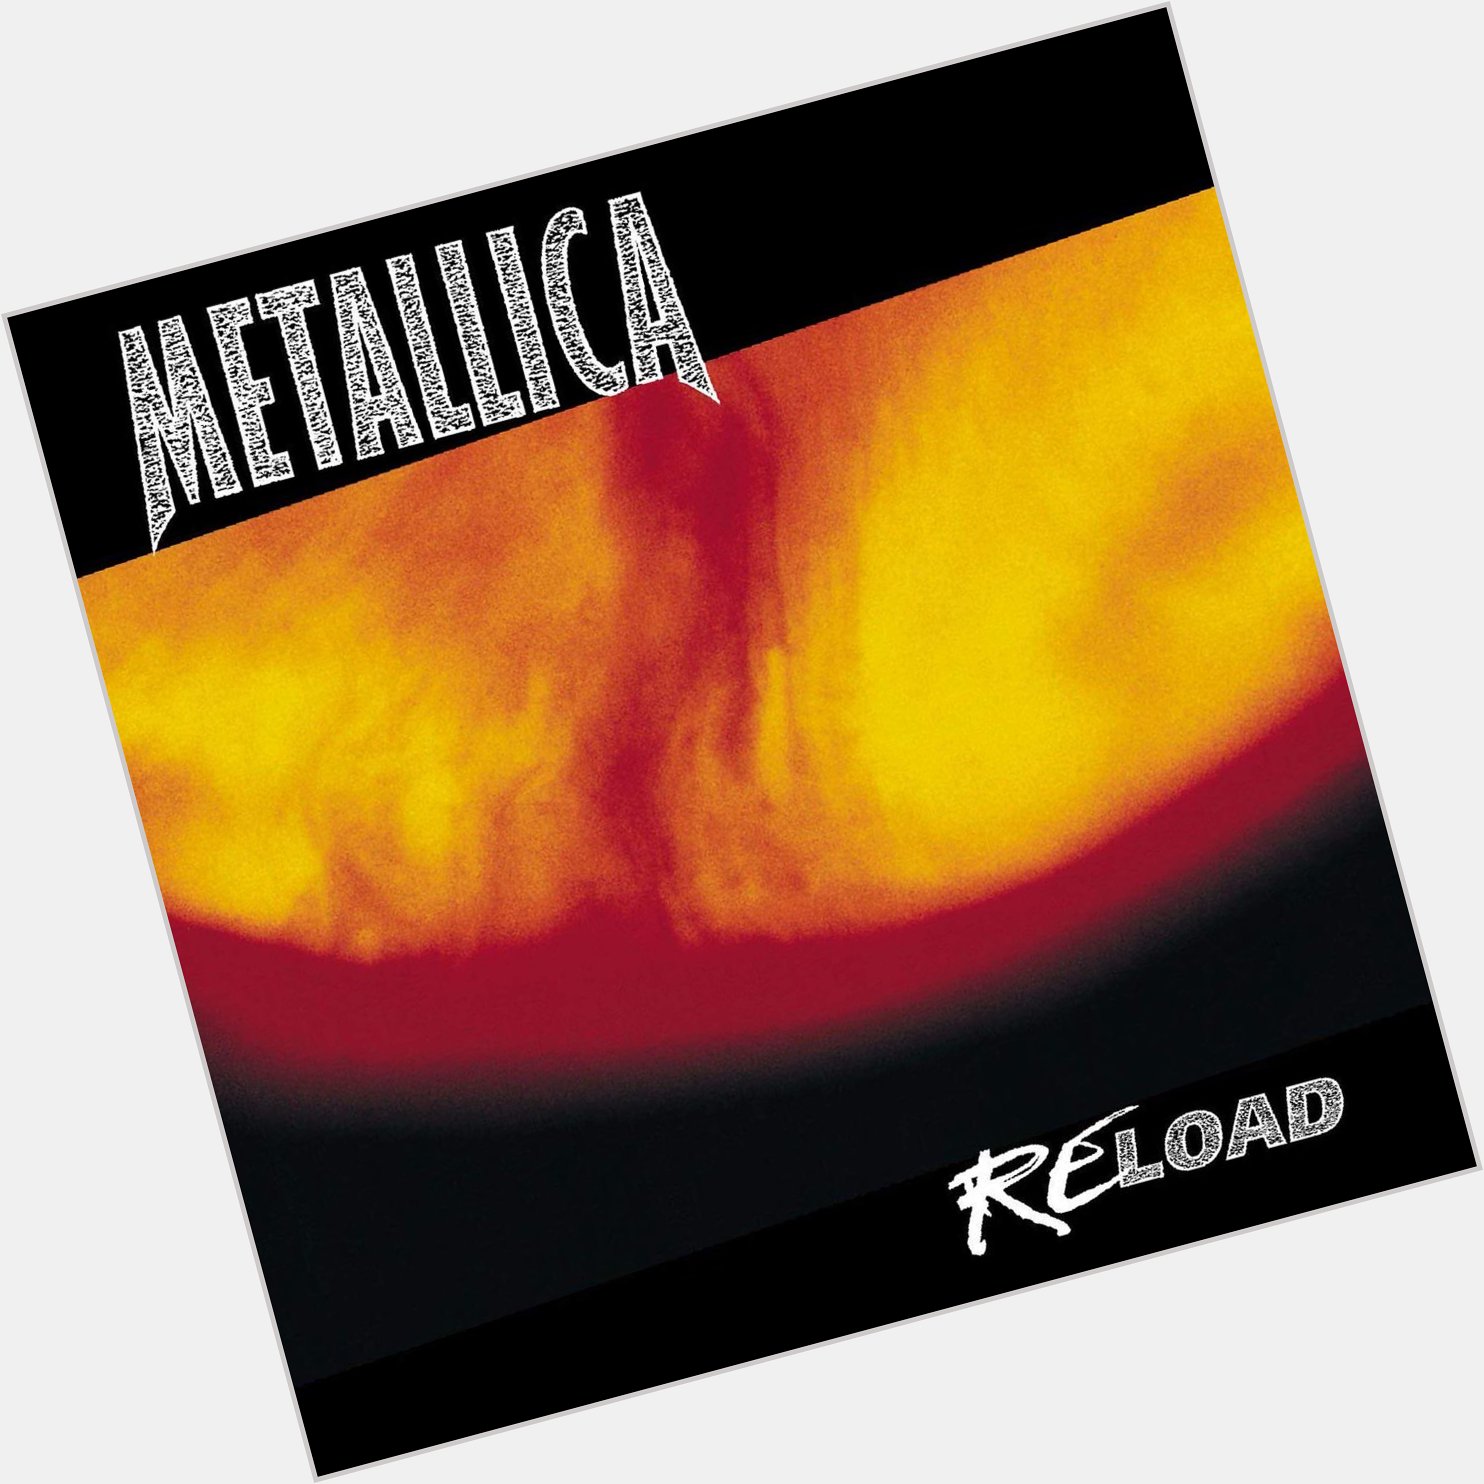  Fuel
from ReLoad
by Metallica

22nd Anniversary and
Happy Birthday, Kirk Hammett 